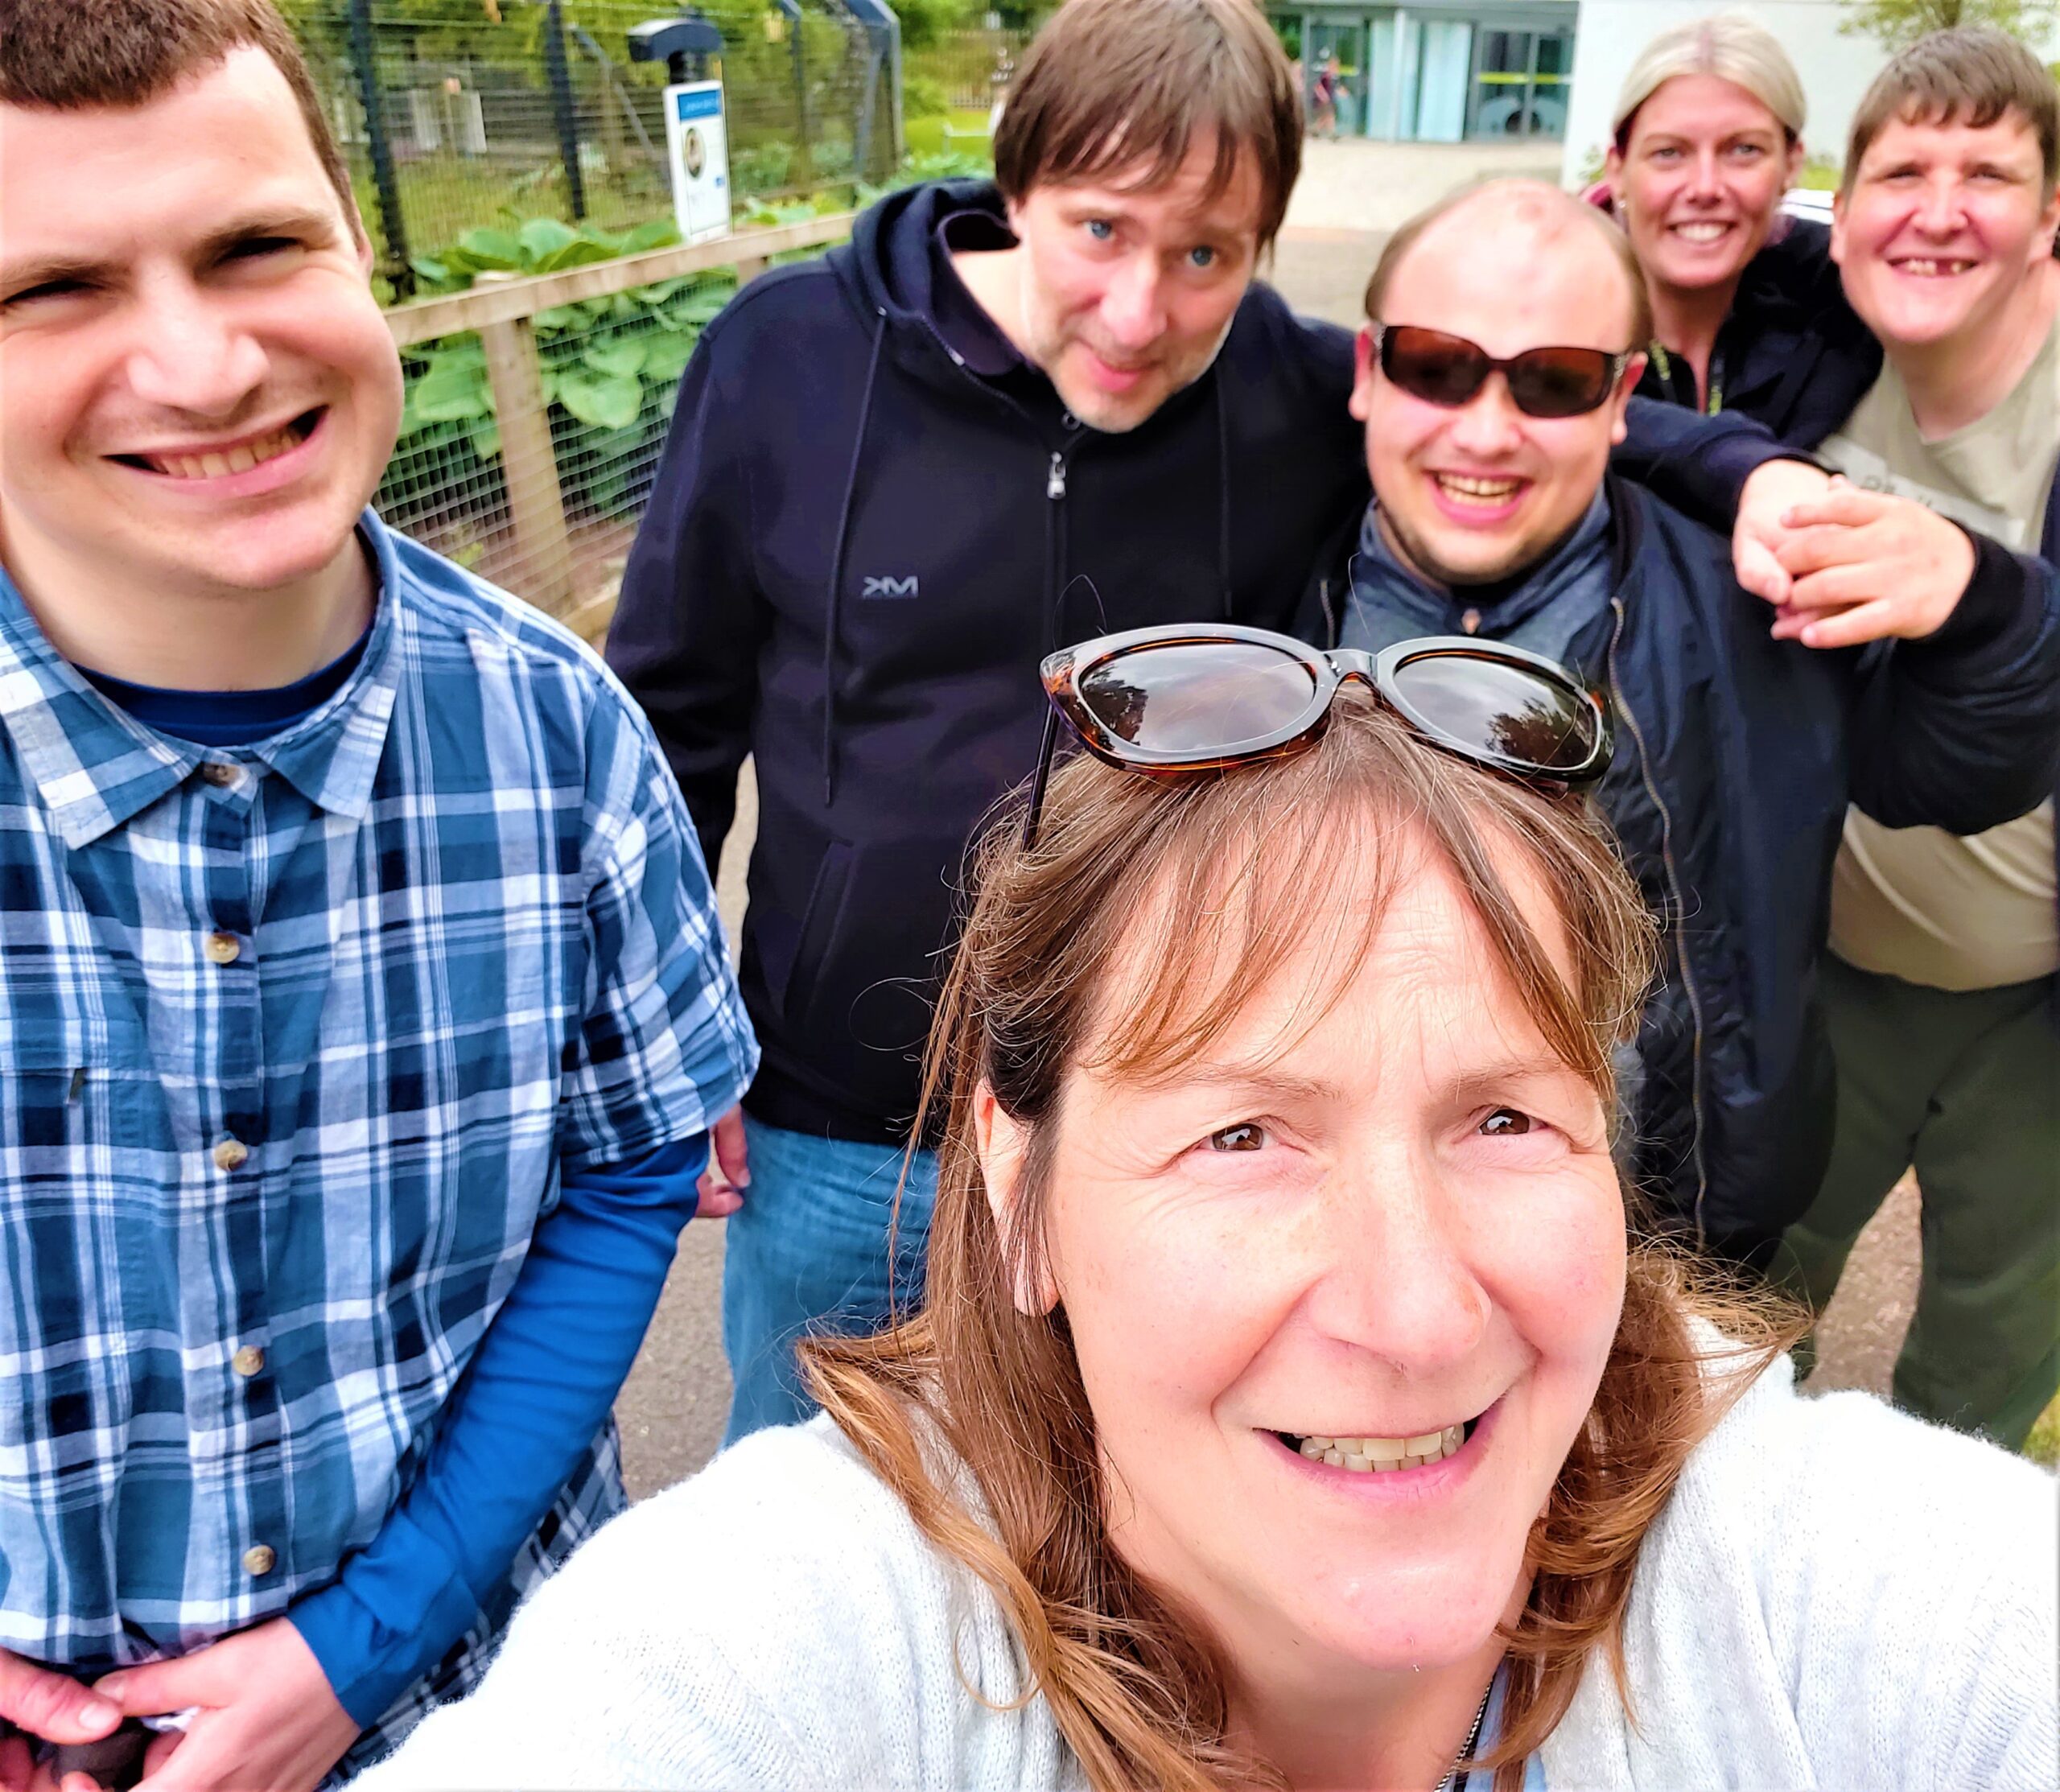 service users and staff selfie at the zoo